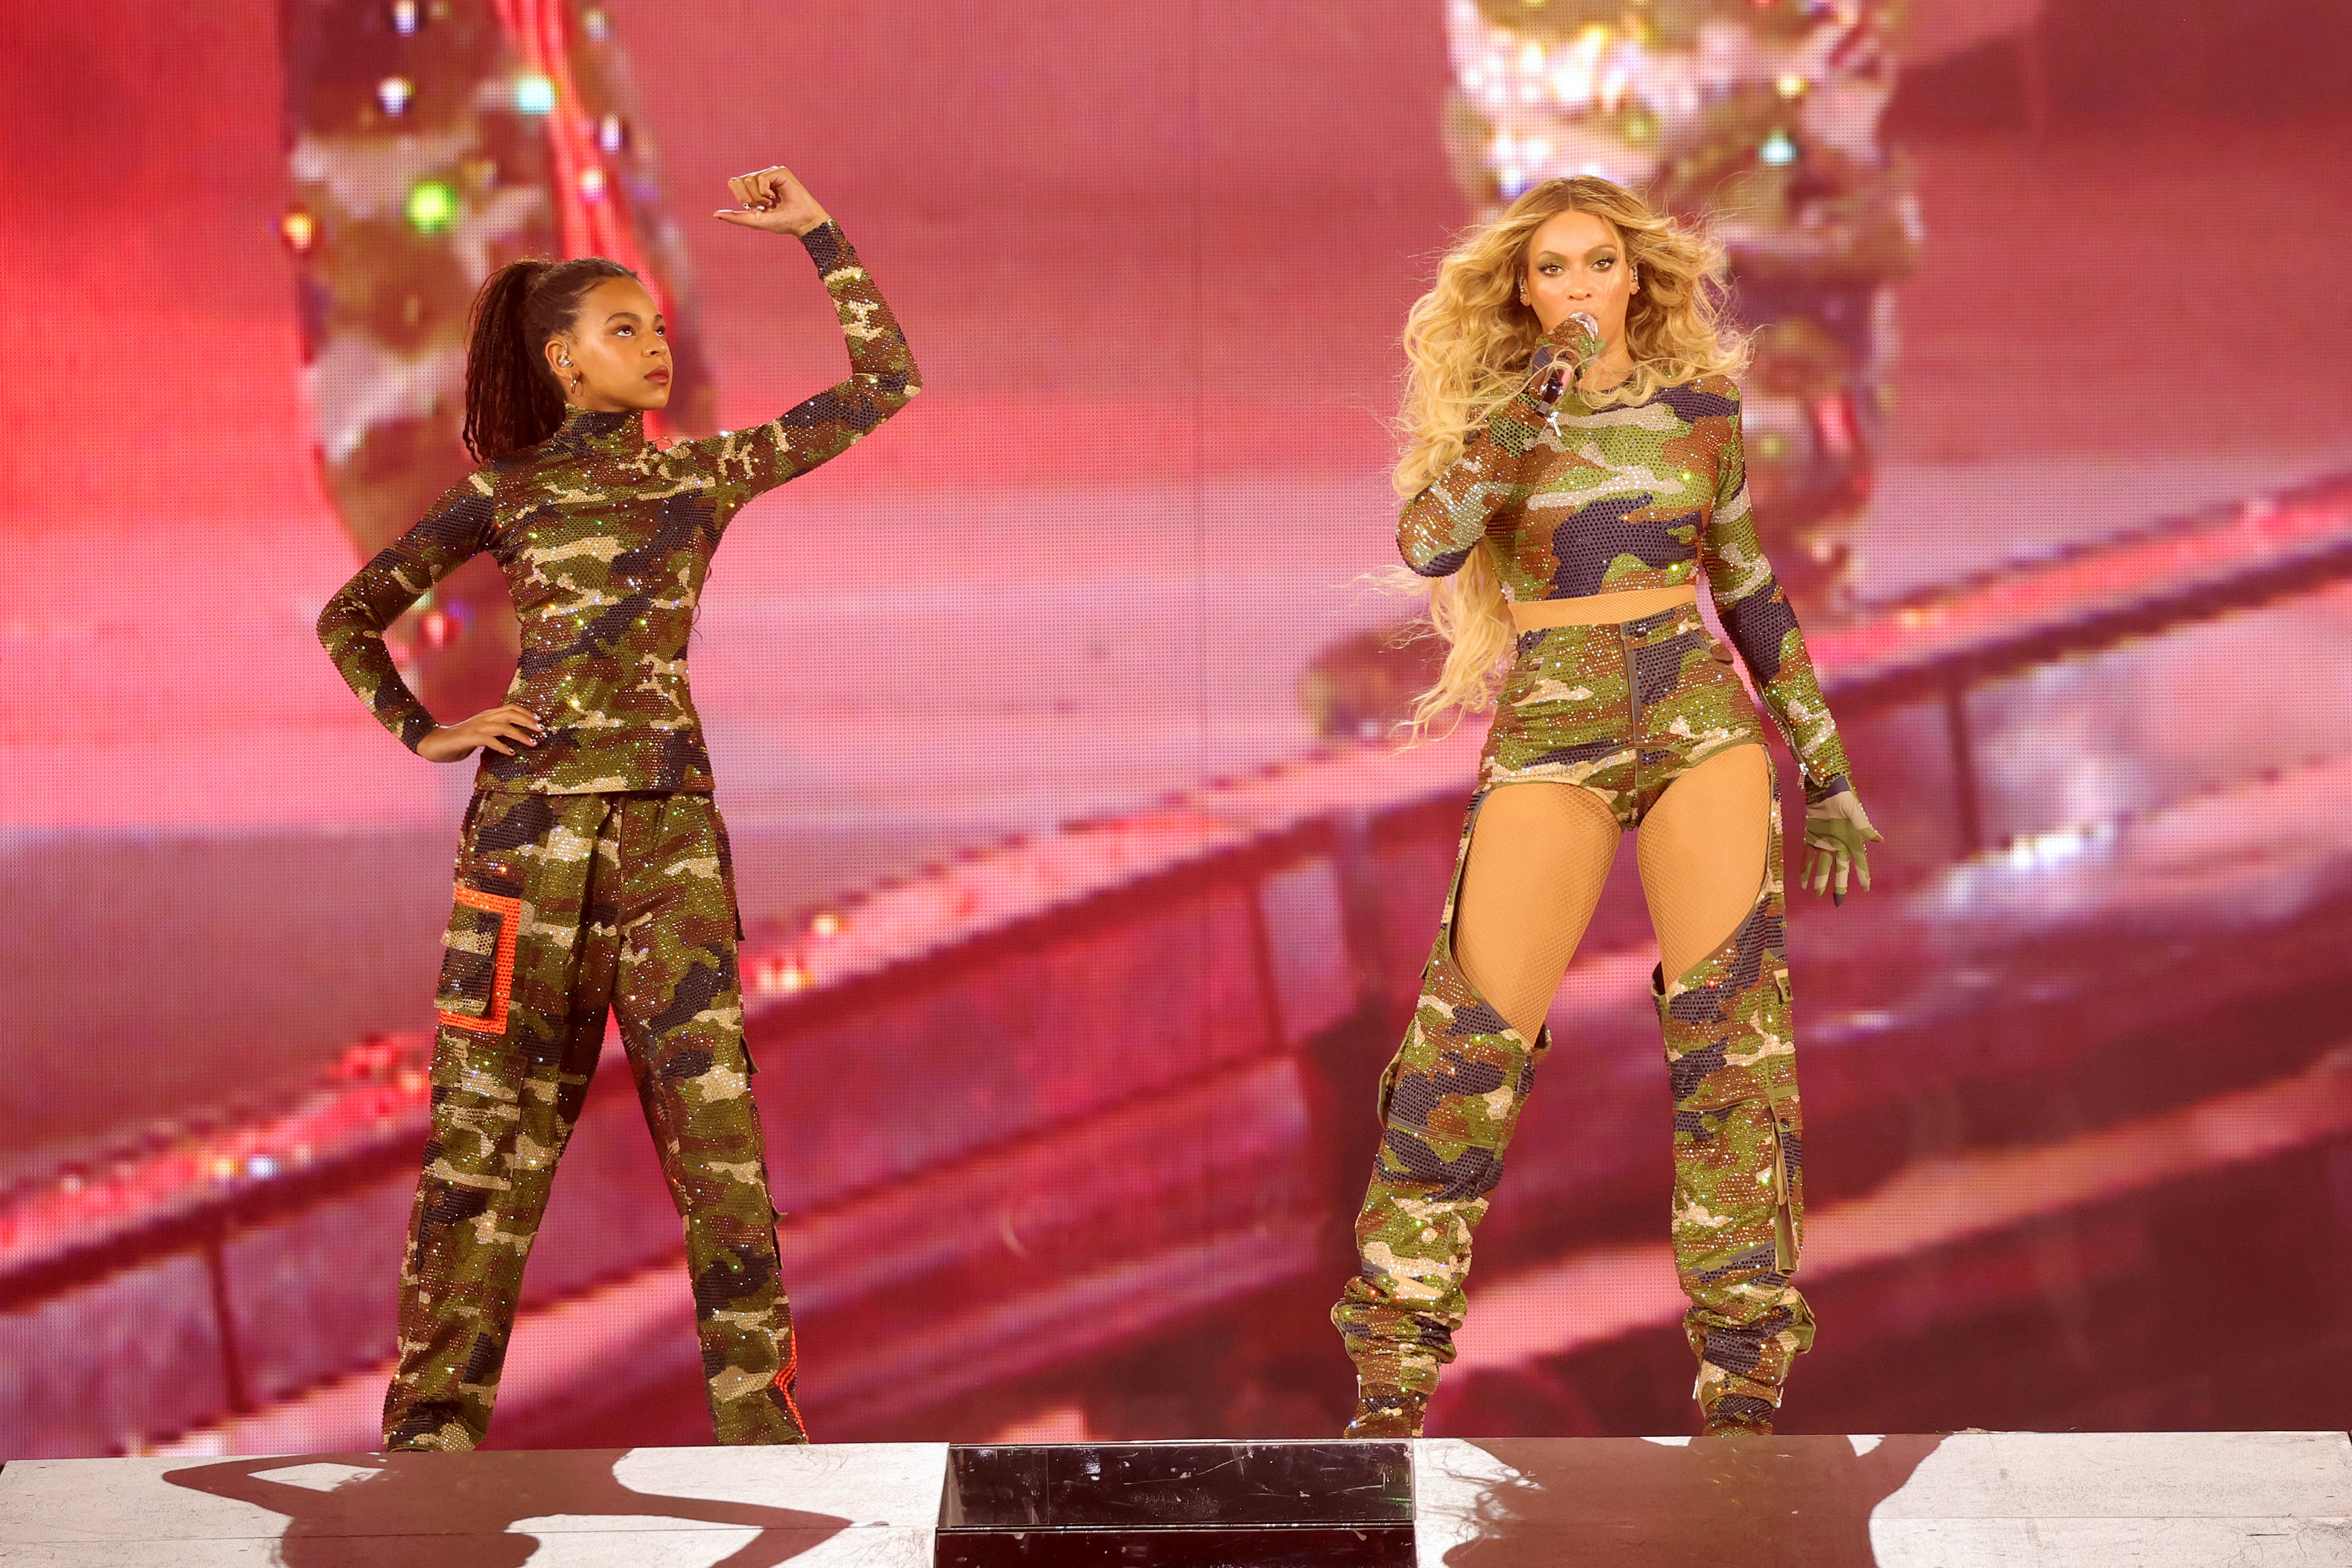 Two performers in matching camouflage outfits on stage